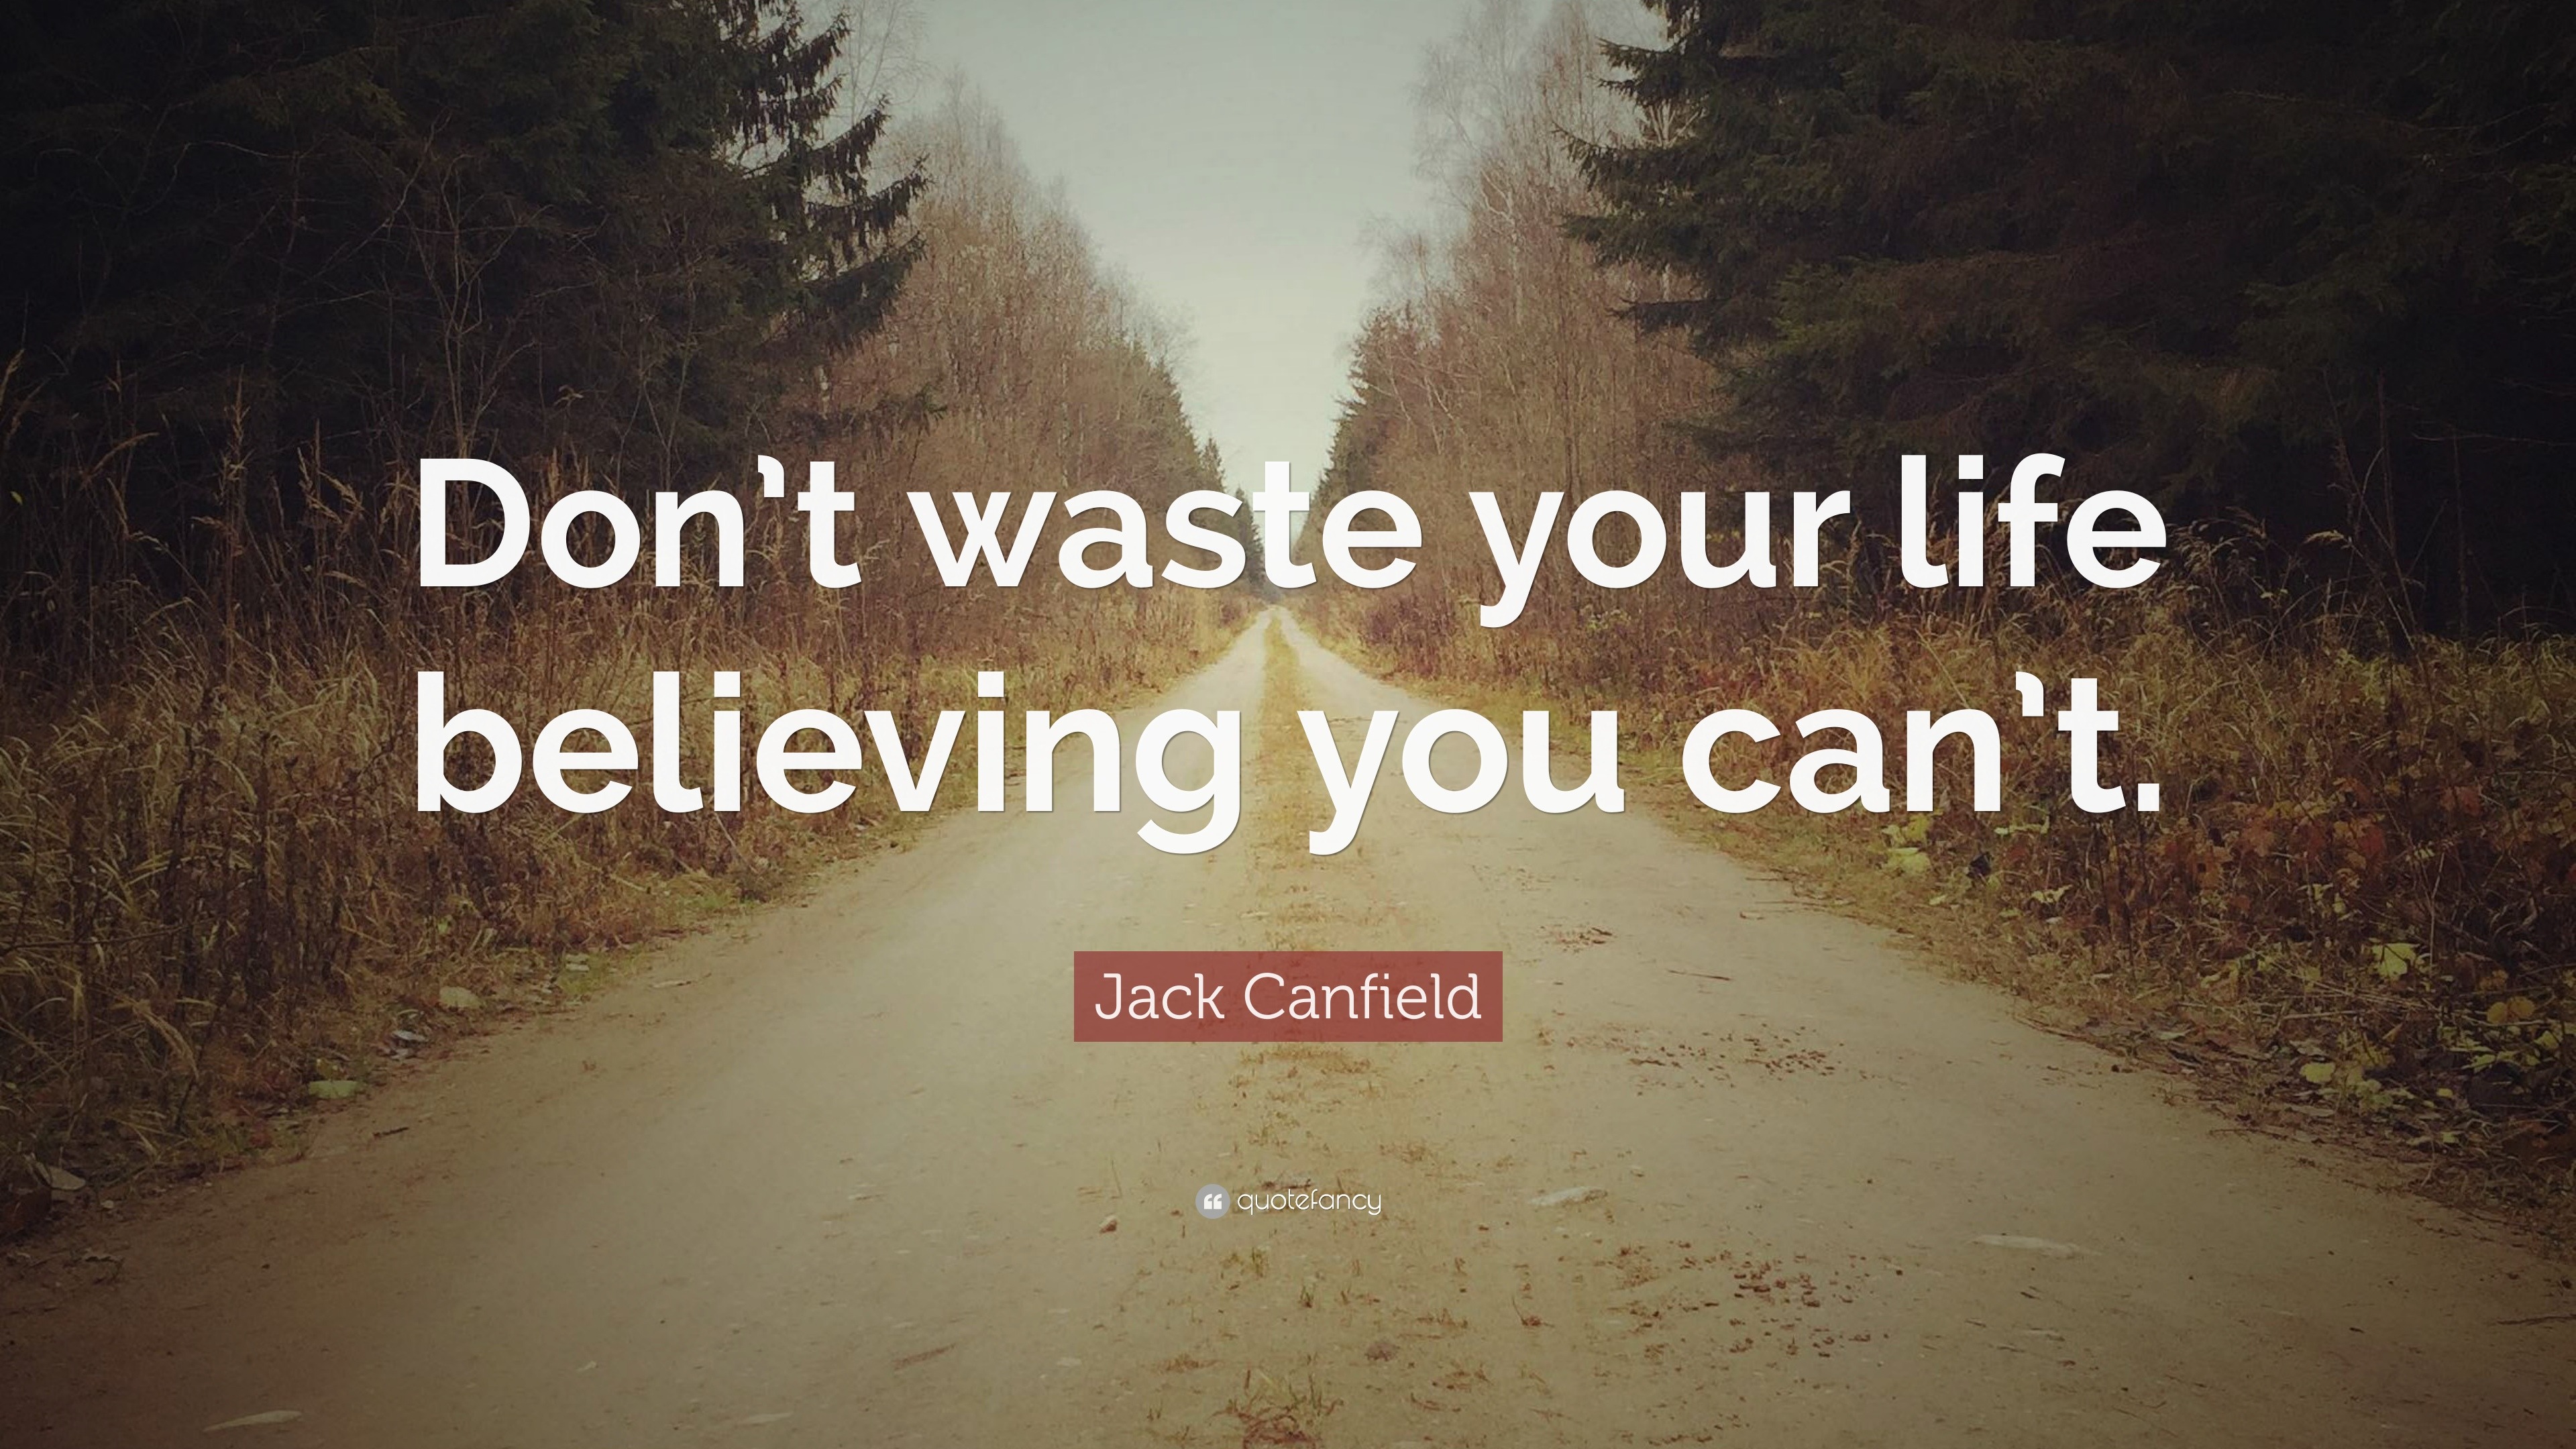 Jack Canfield Quote: “Don’t waste your life believing you can’t.” (12